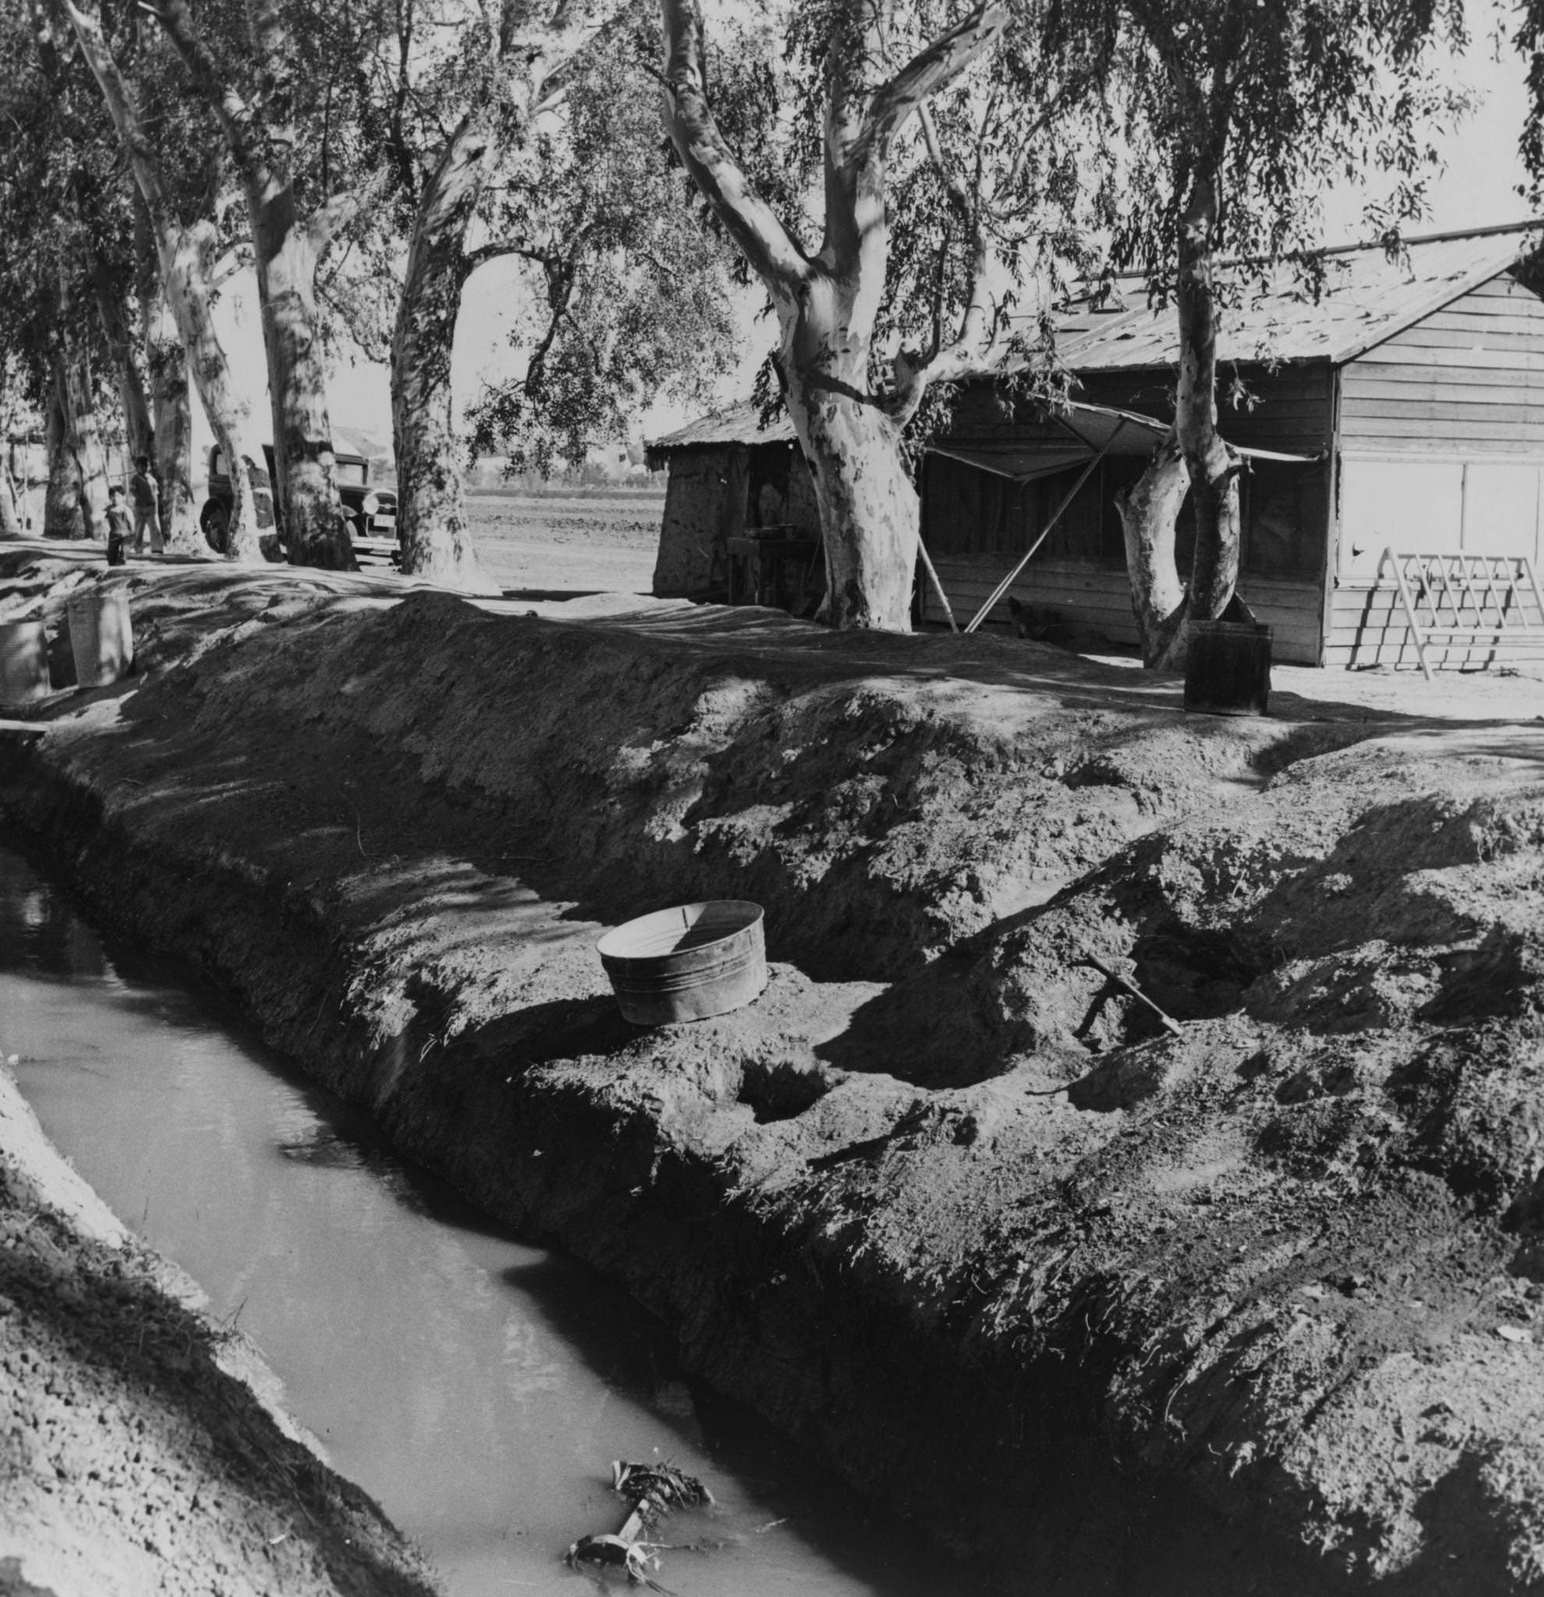 Home of Dust Bowl Refugee, Imperial County, California, 1930s